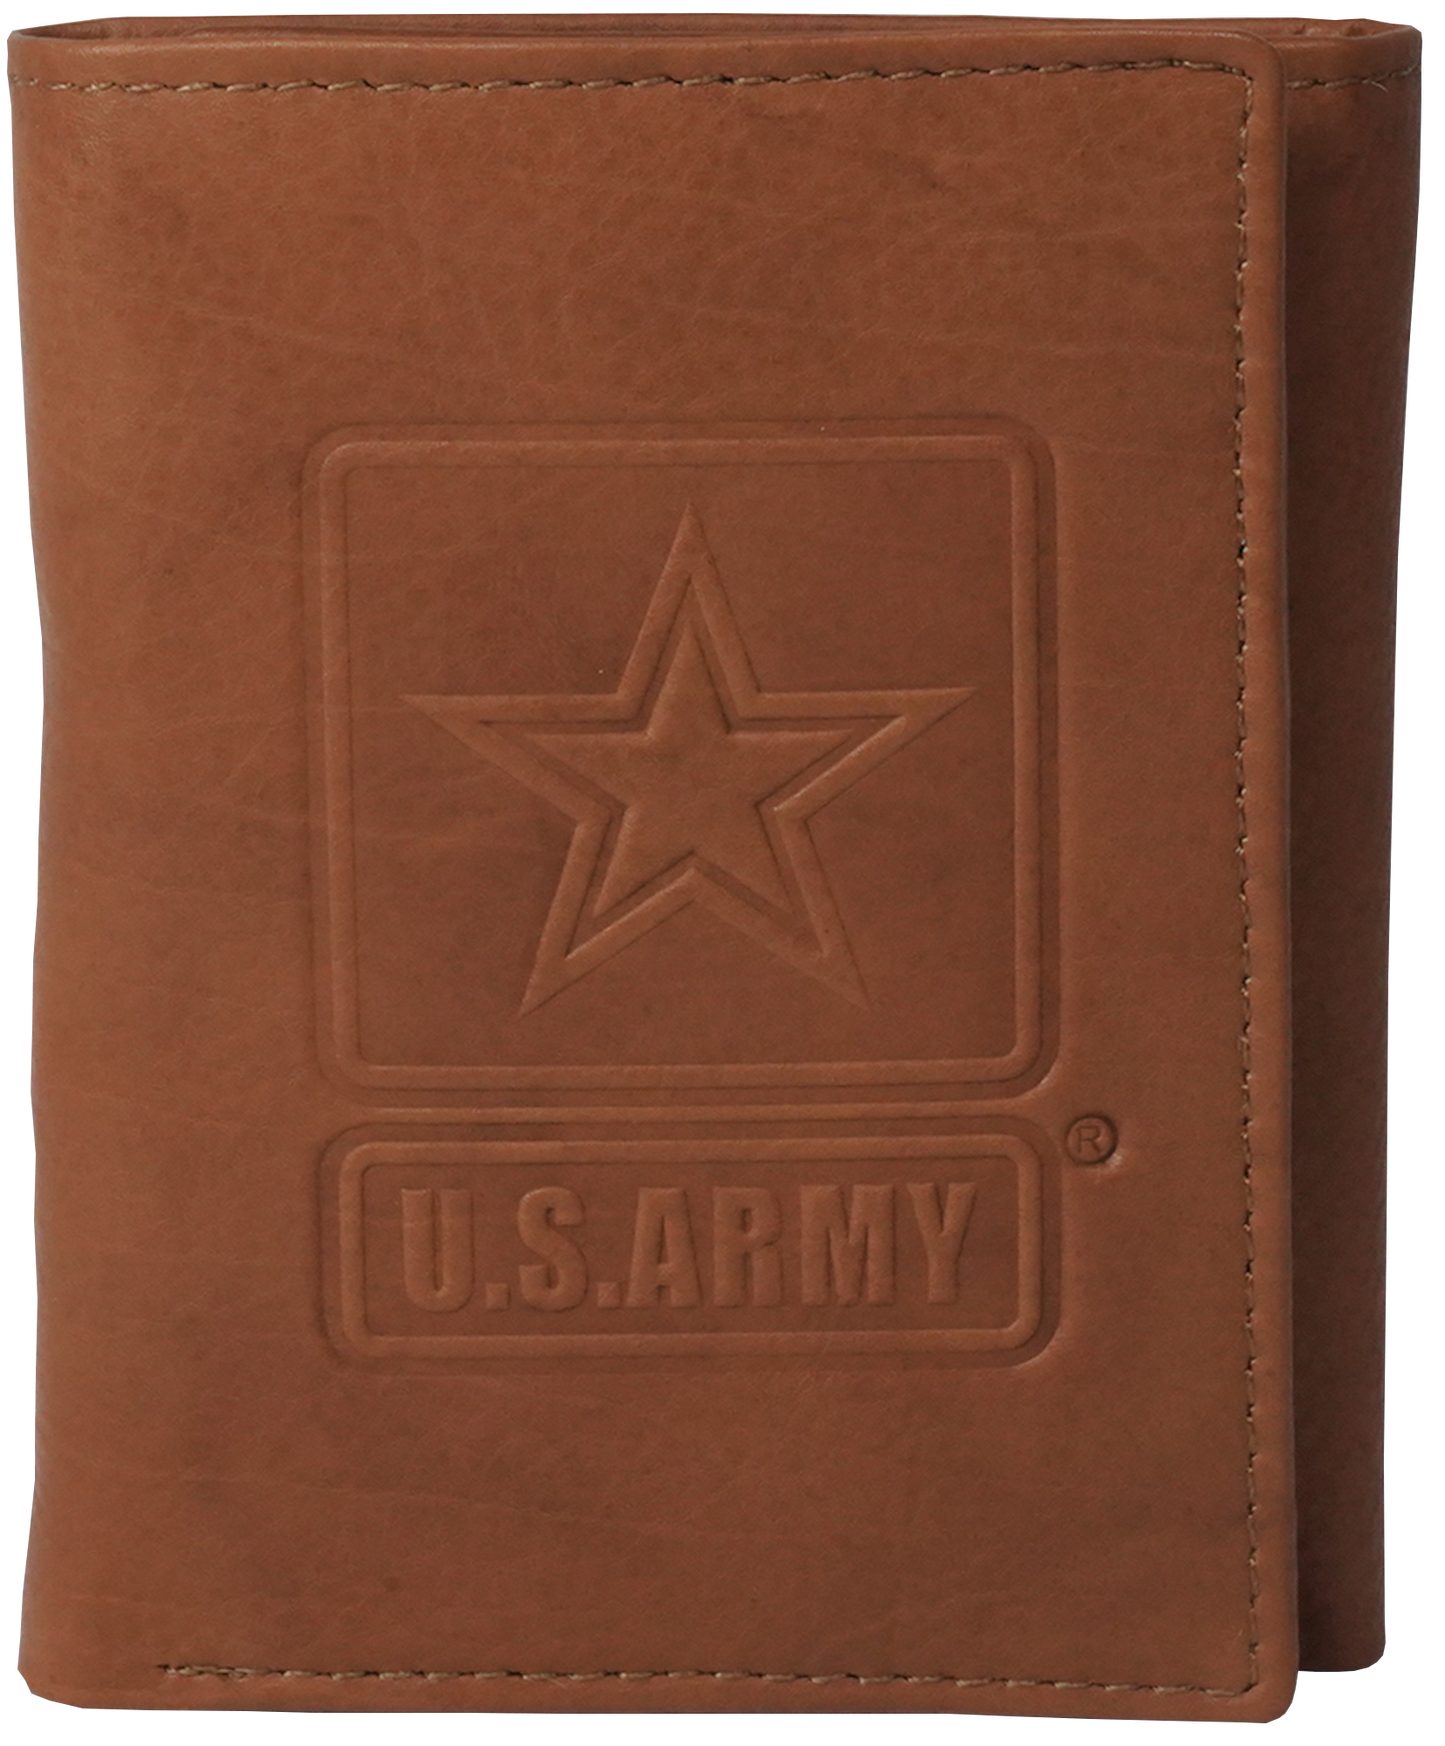 U.S. Army Star Embossed on 100% Brown Trifold Wallet